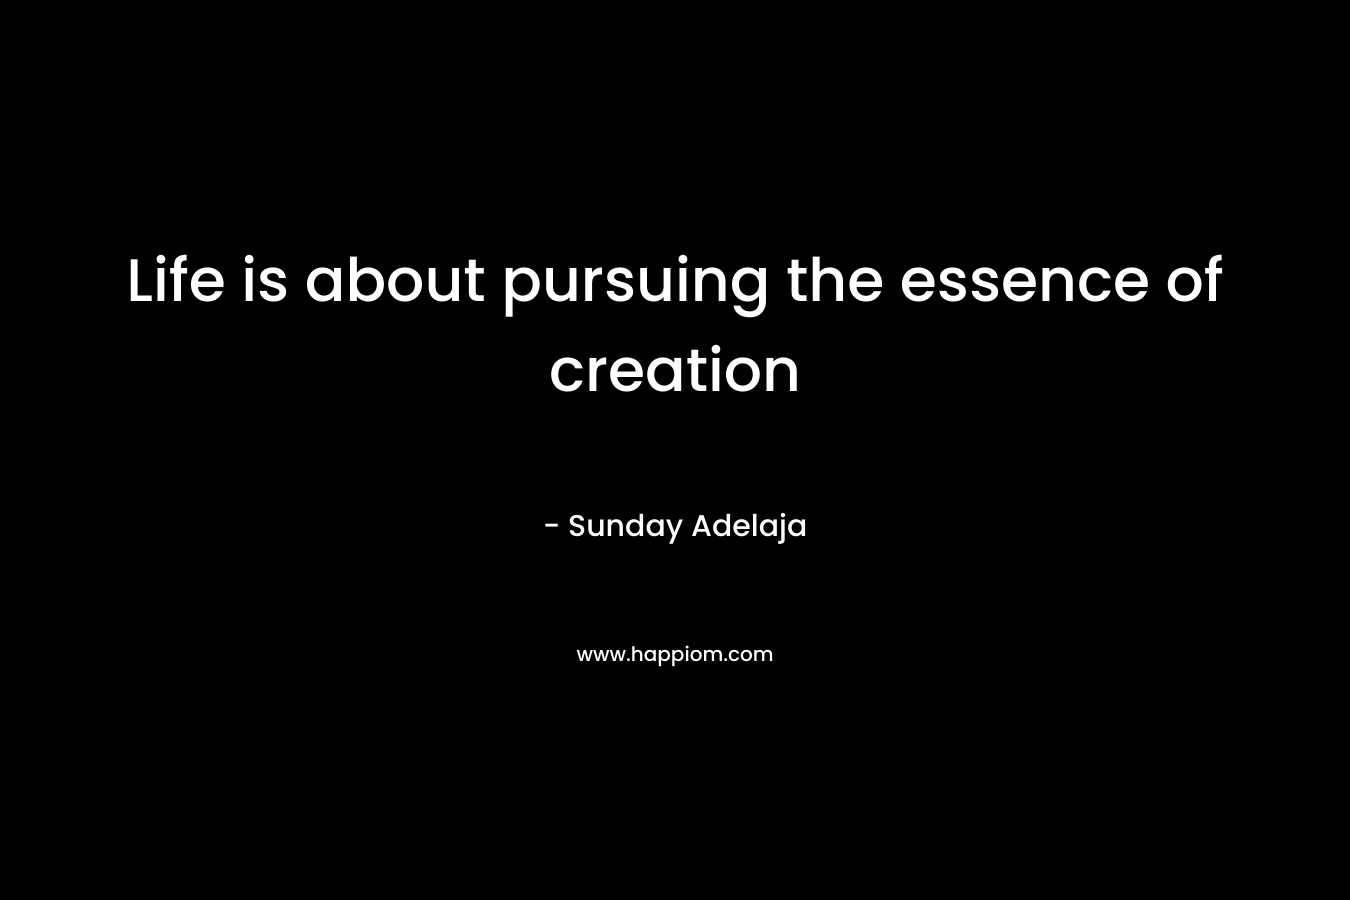 Life is about pursuing the essence of creation